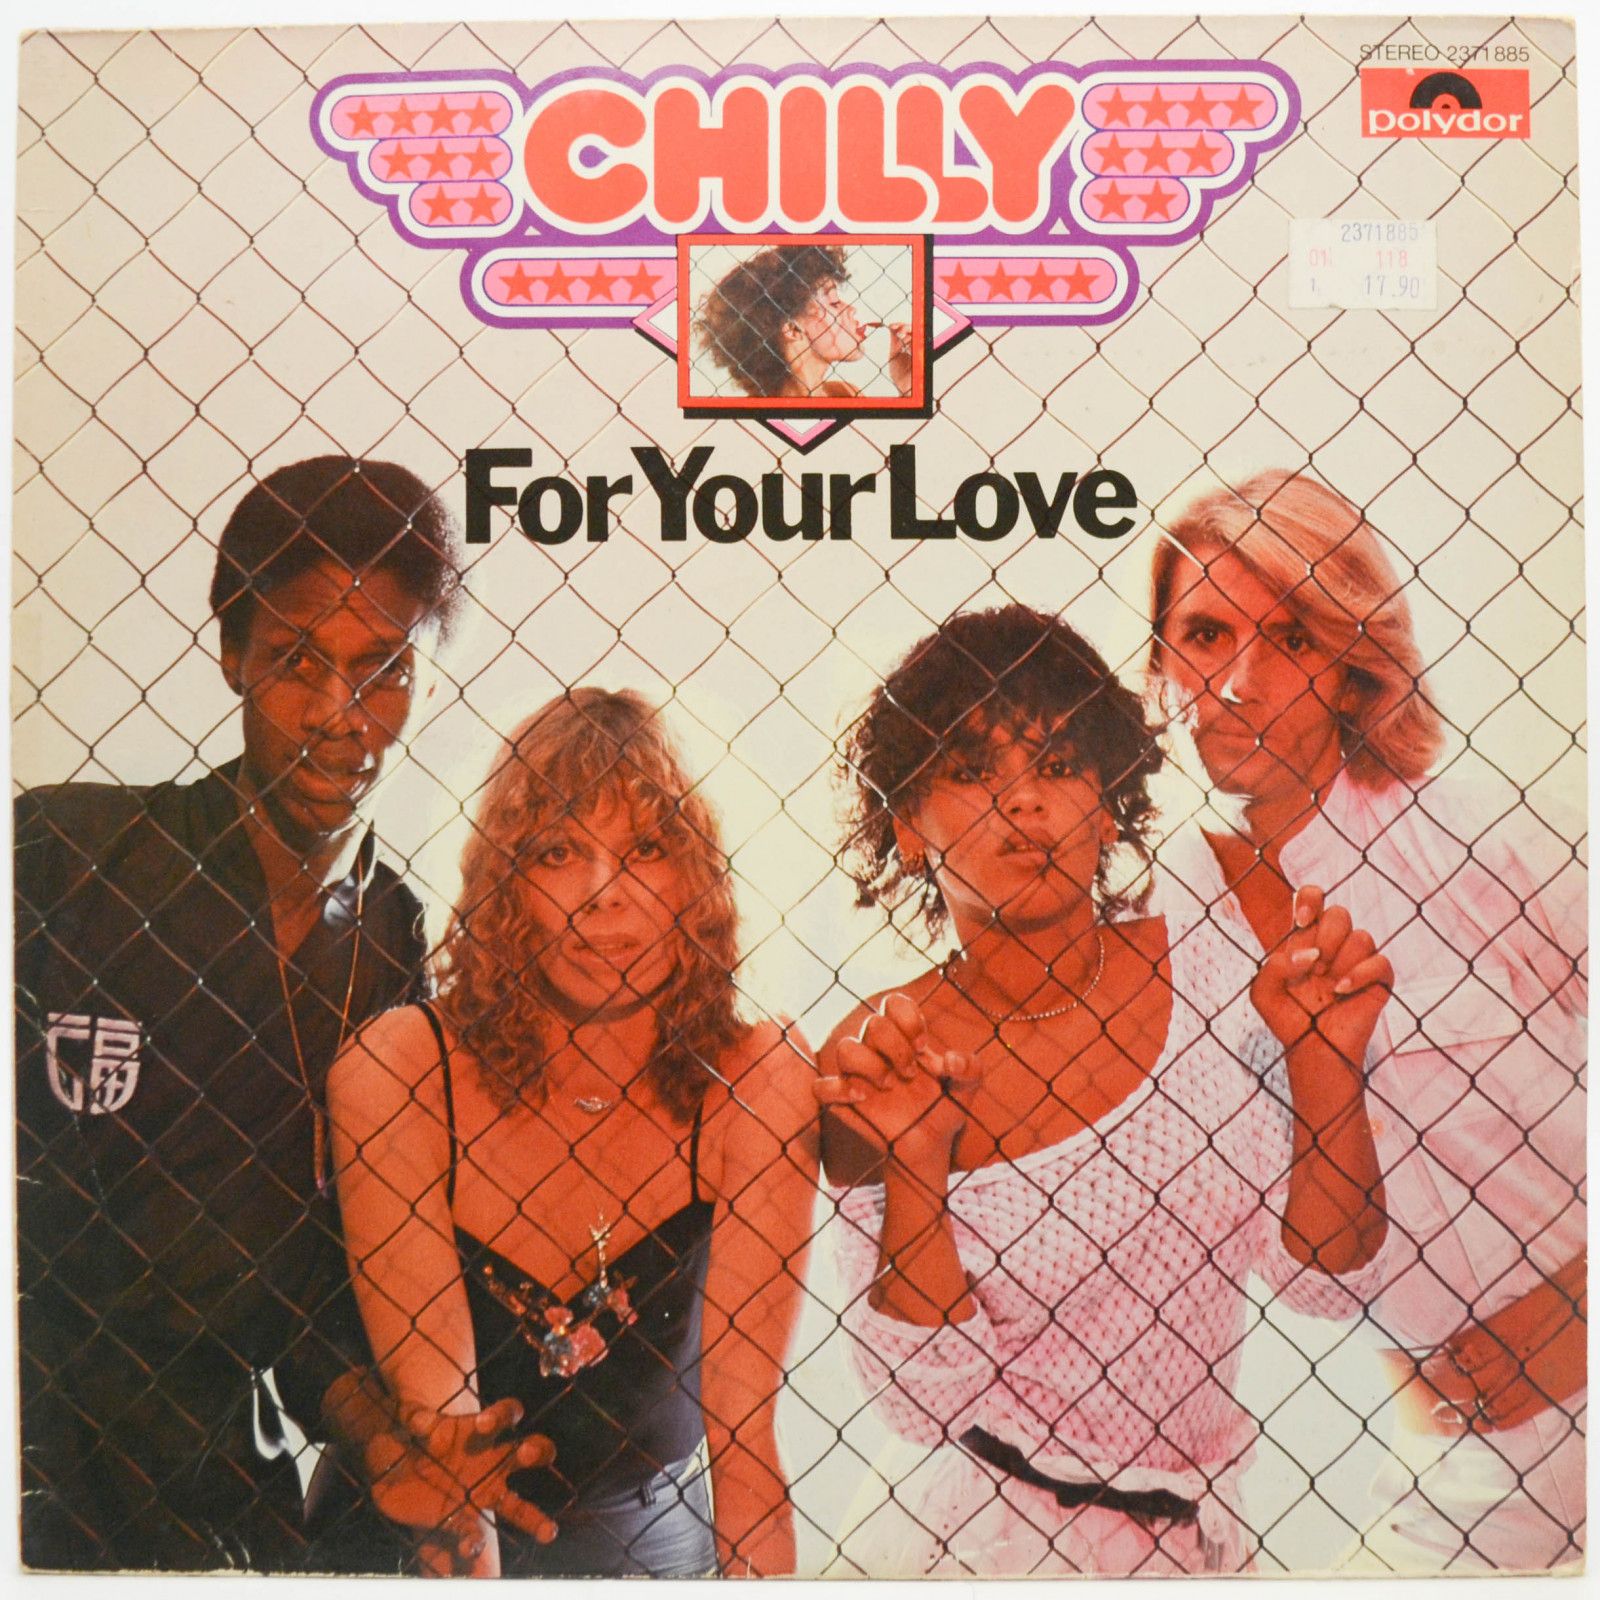 Chilly — For Your Love, 1978